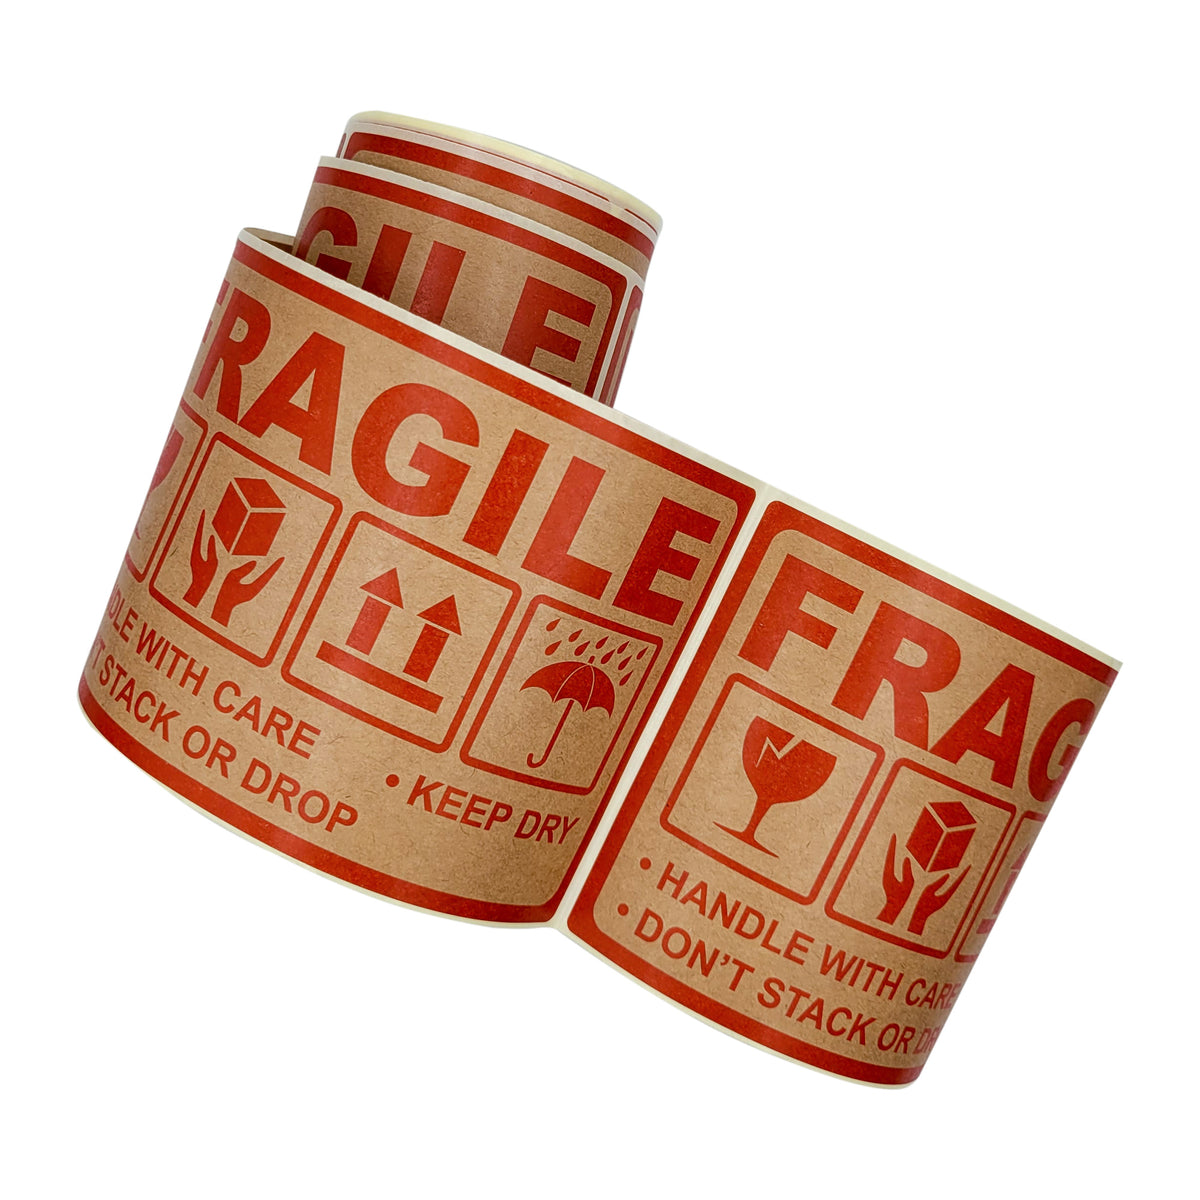 Warning Labels on Roll 90x150 mm KRAFT- FRAGILE- handle with care- keep dry- don’t stack or drop- this way up 100 pcs